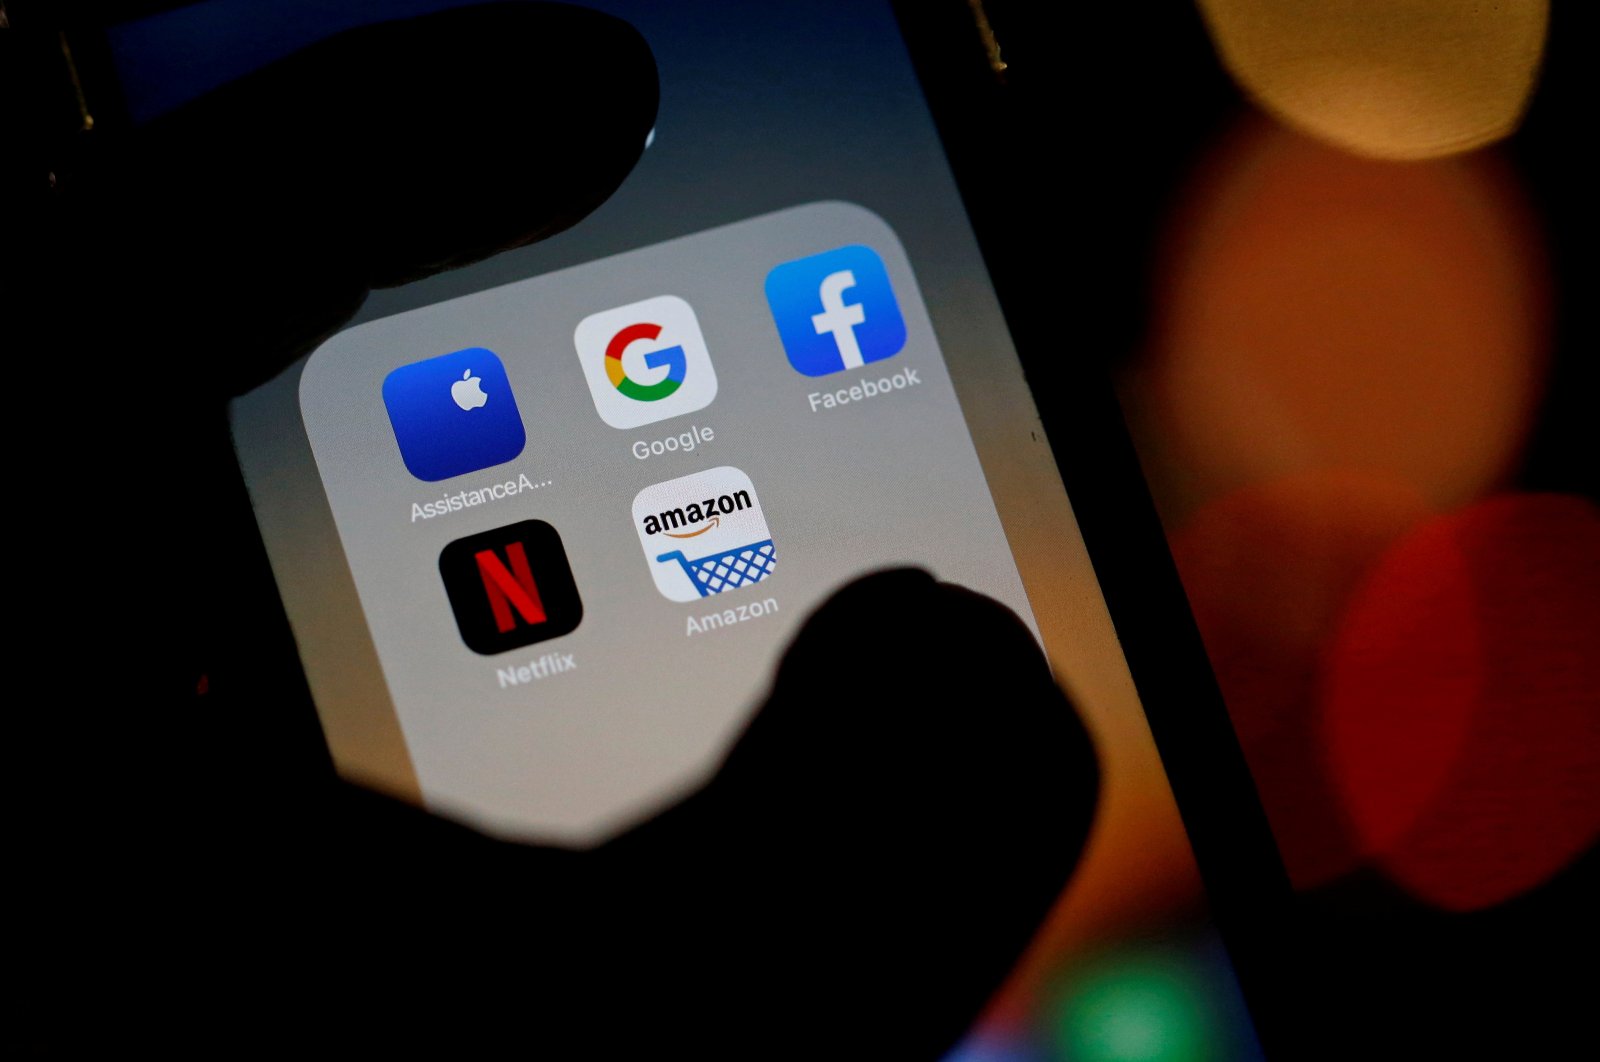 The logos of mobile apps, Google, Amazon, Facebook, Apple and Netflix, are displayed on a screen in this illustration picture taken Dec. 3, 2019. (Reuters Photo)